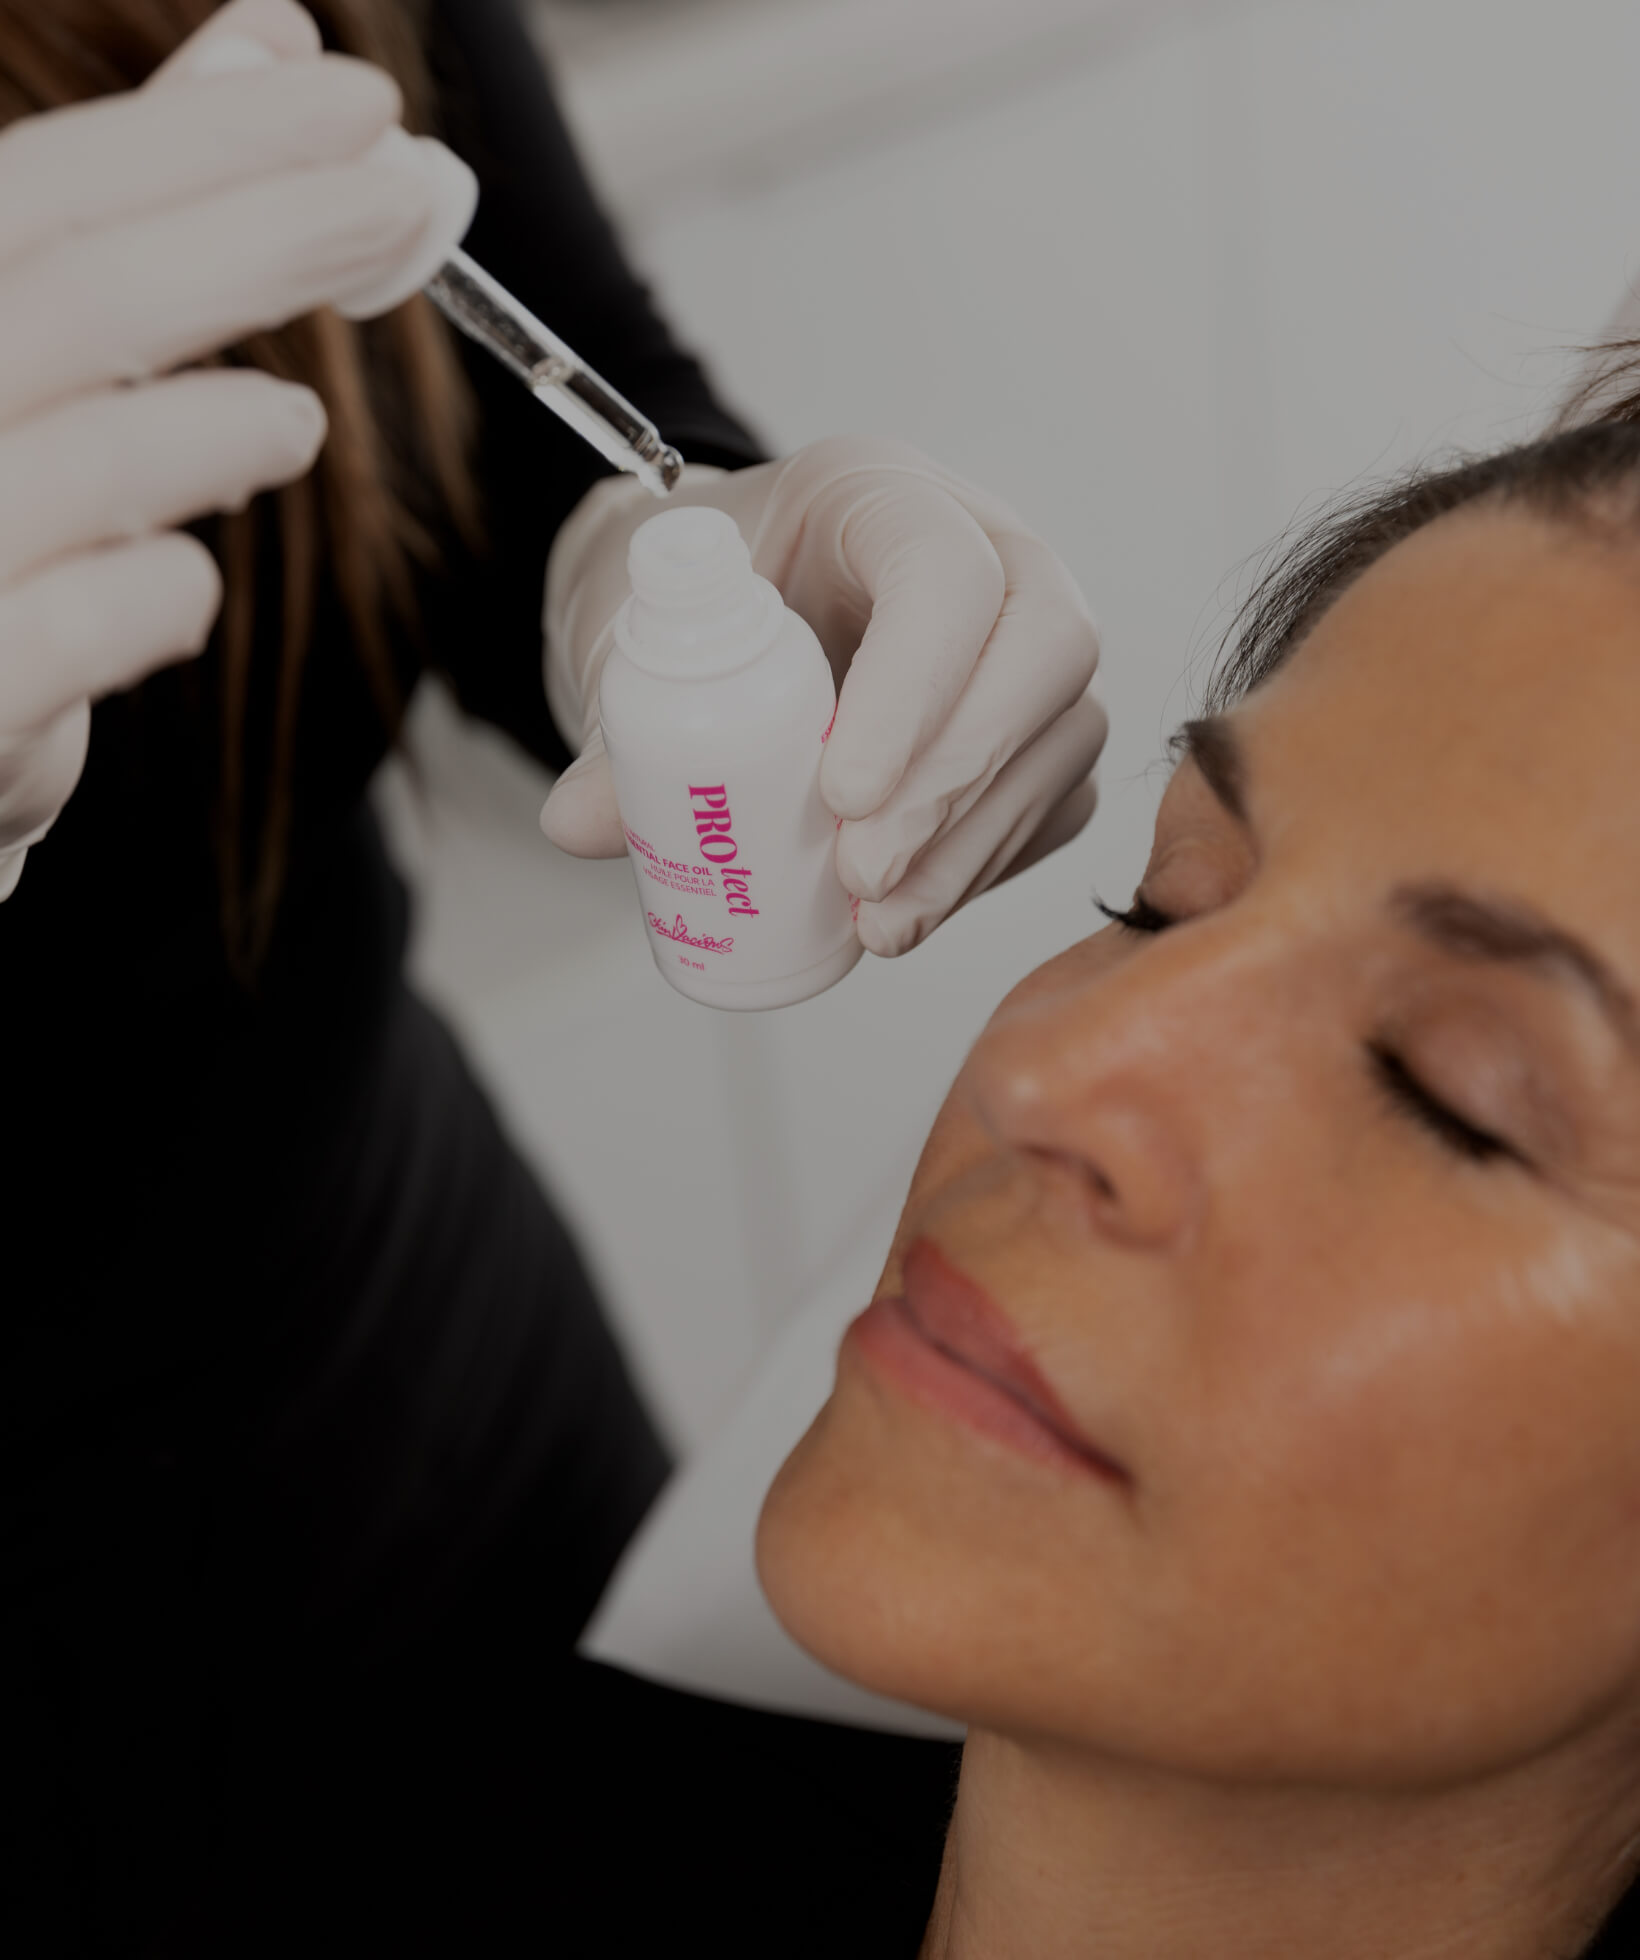 A Clinique Chloé medical aesthetic technician applying a serum to a female patient's face after a microneedling treatment